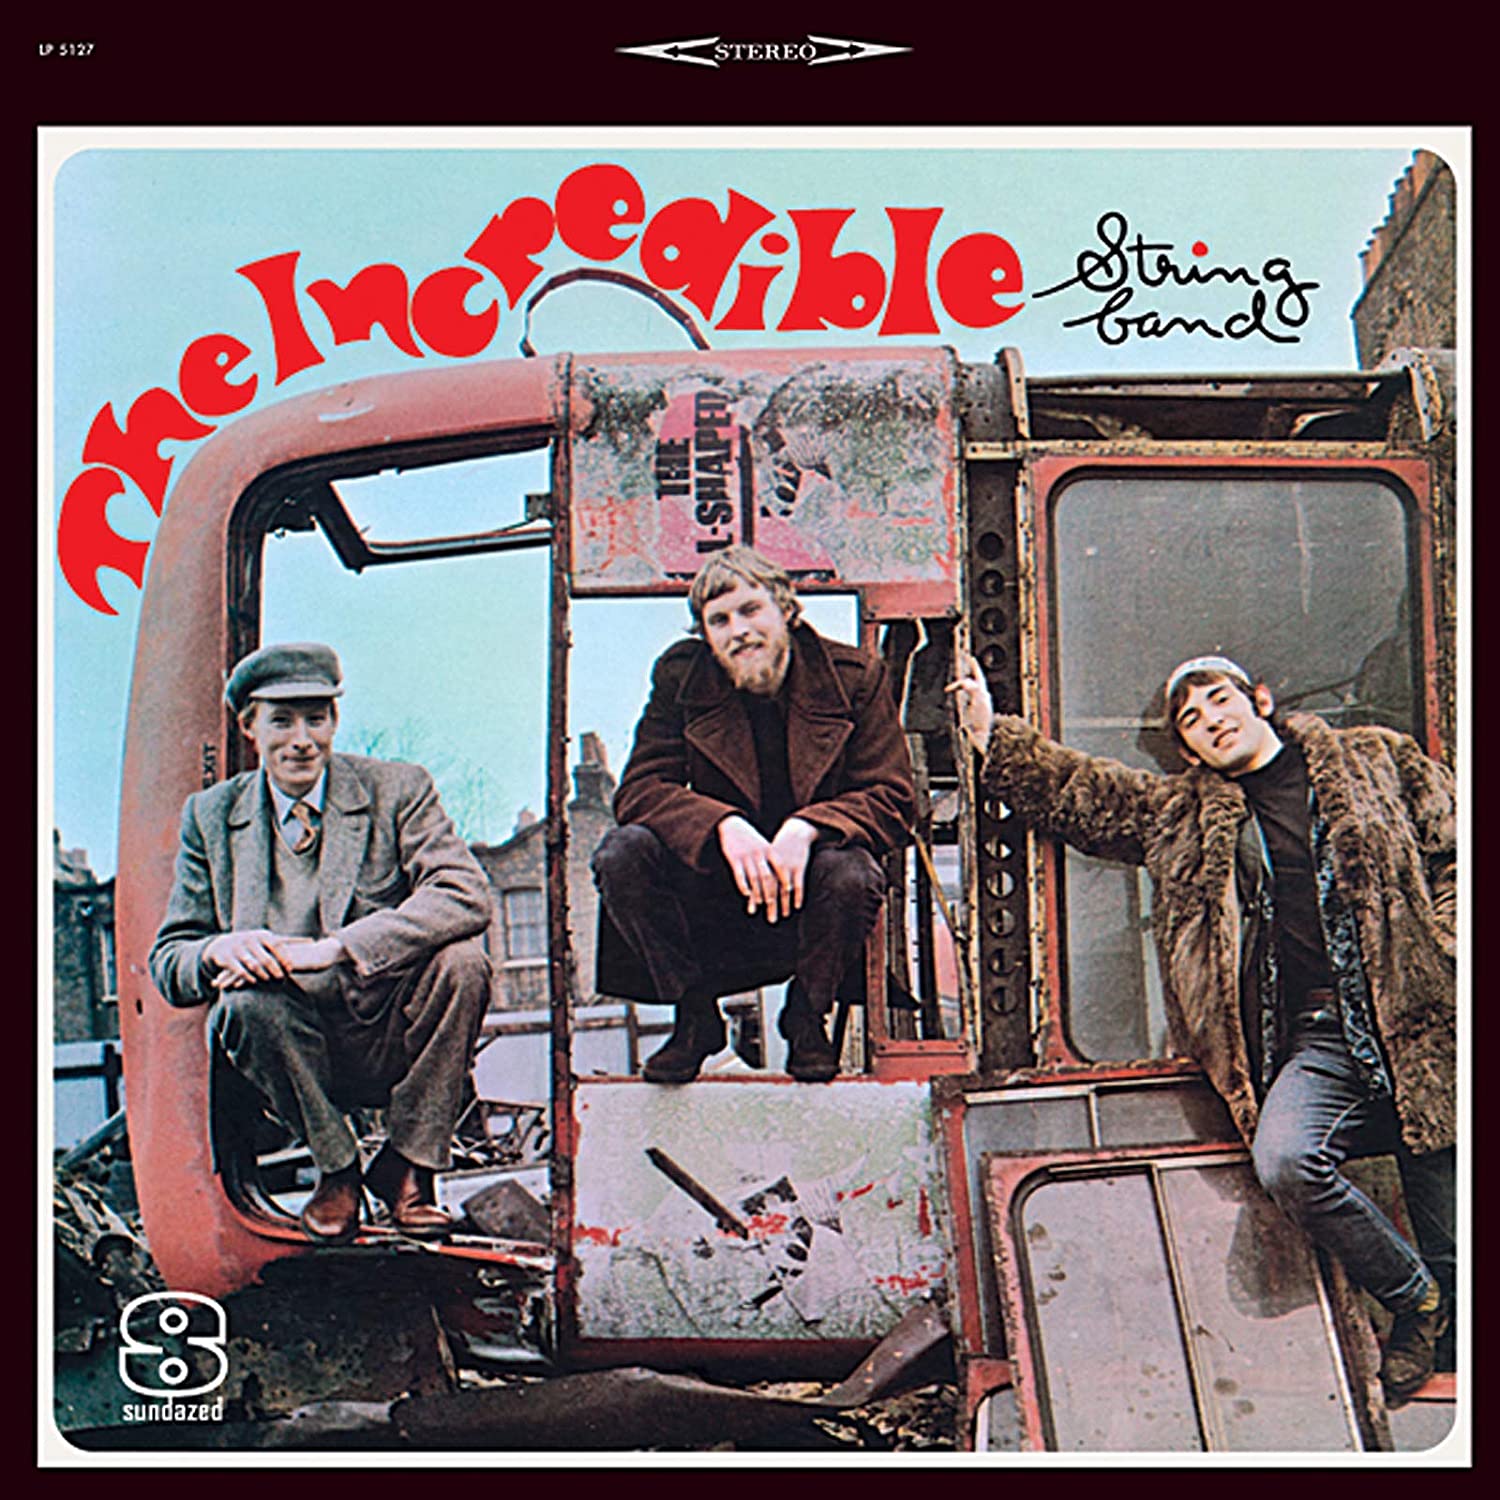 The Incredible String Band – The Incredible String Band VINYL LP